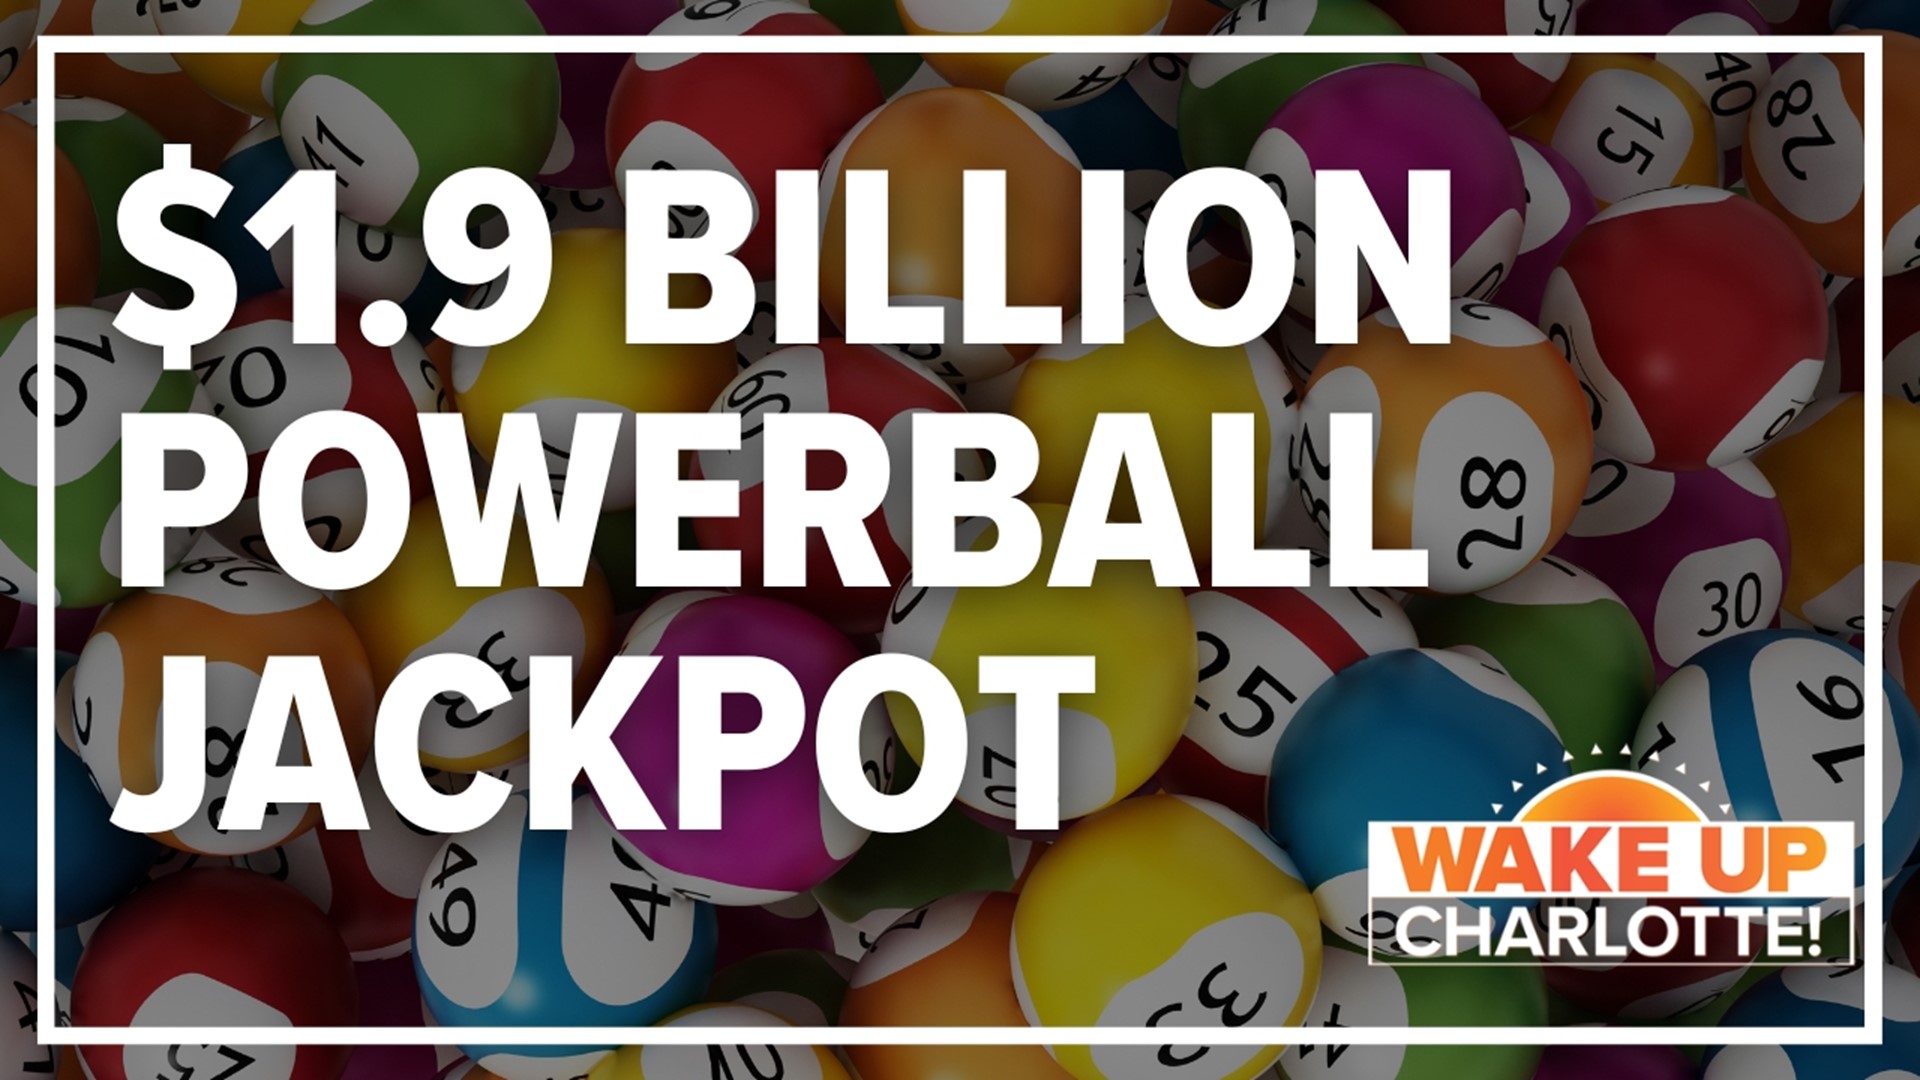 The biggest lottery jackpot in U.S. history could be awarded tonight